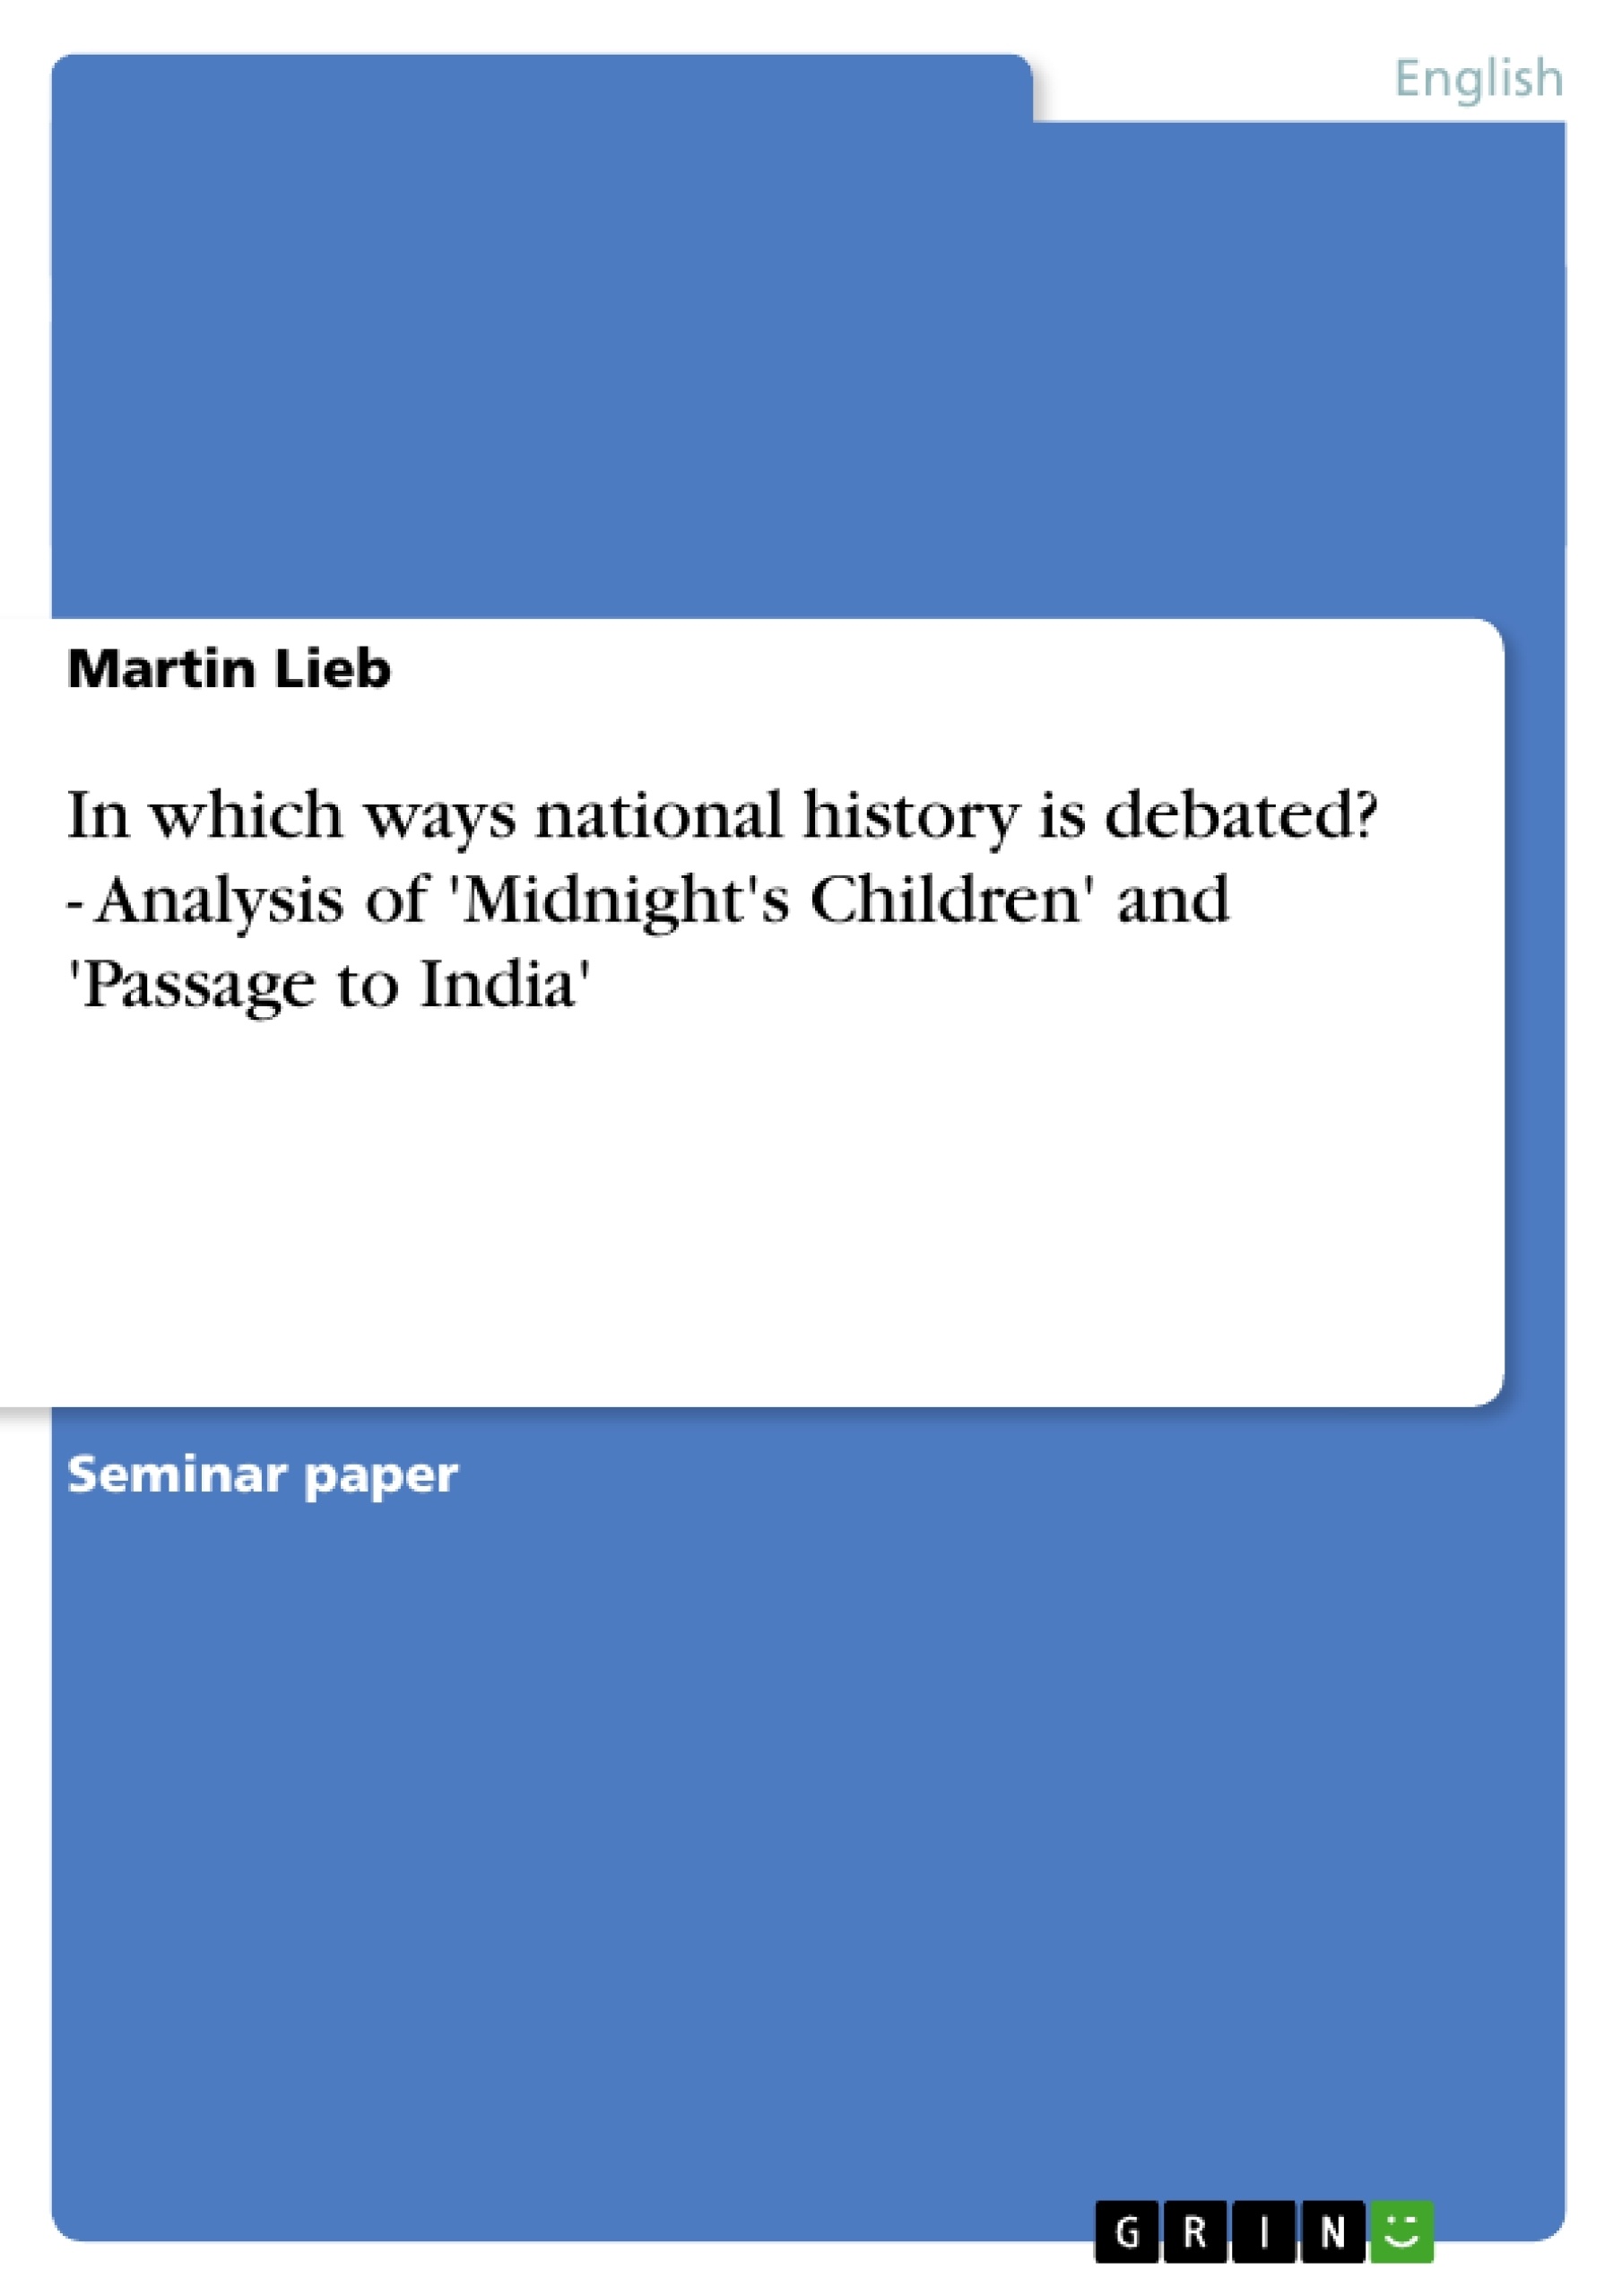 Título: In which ways national history is debated? - Analysis of 'Midnight's Children' and 'Passage to India'